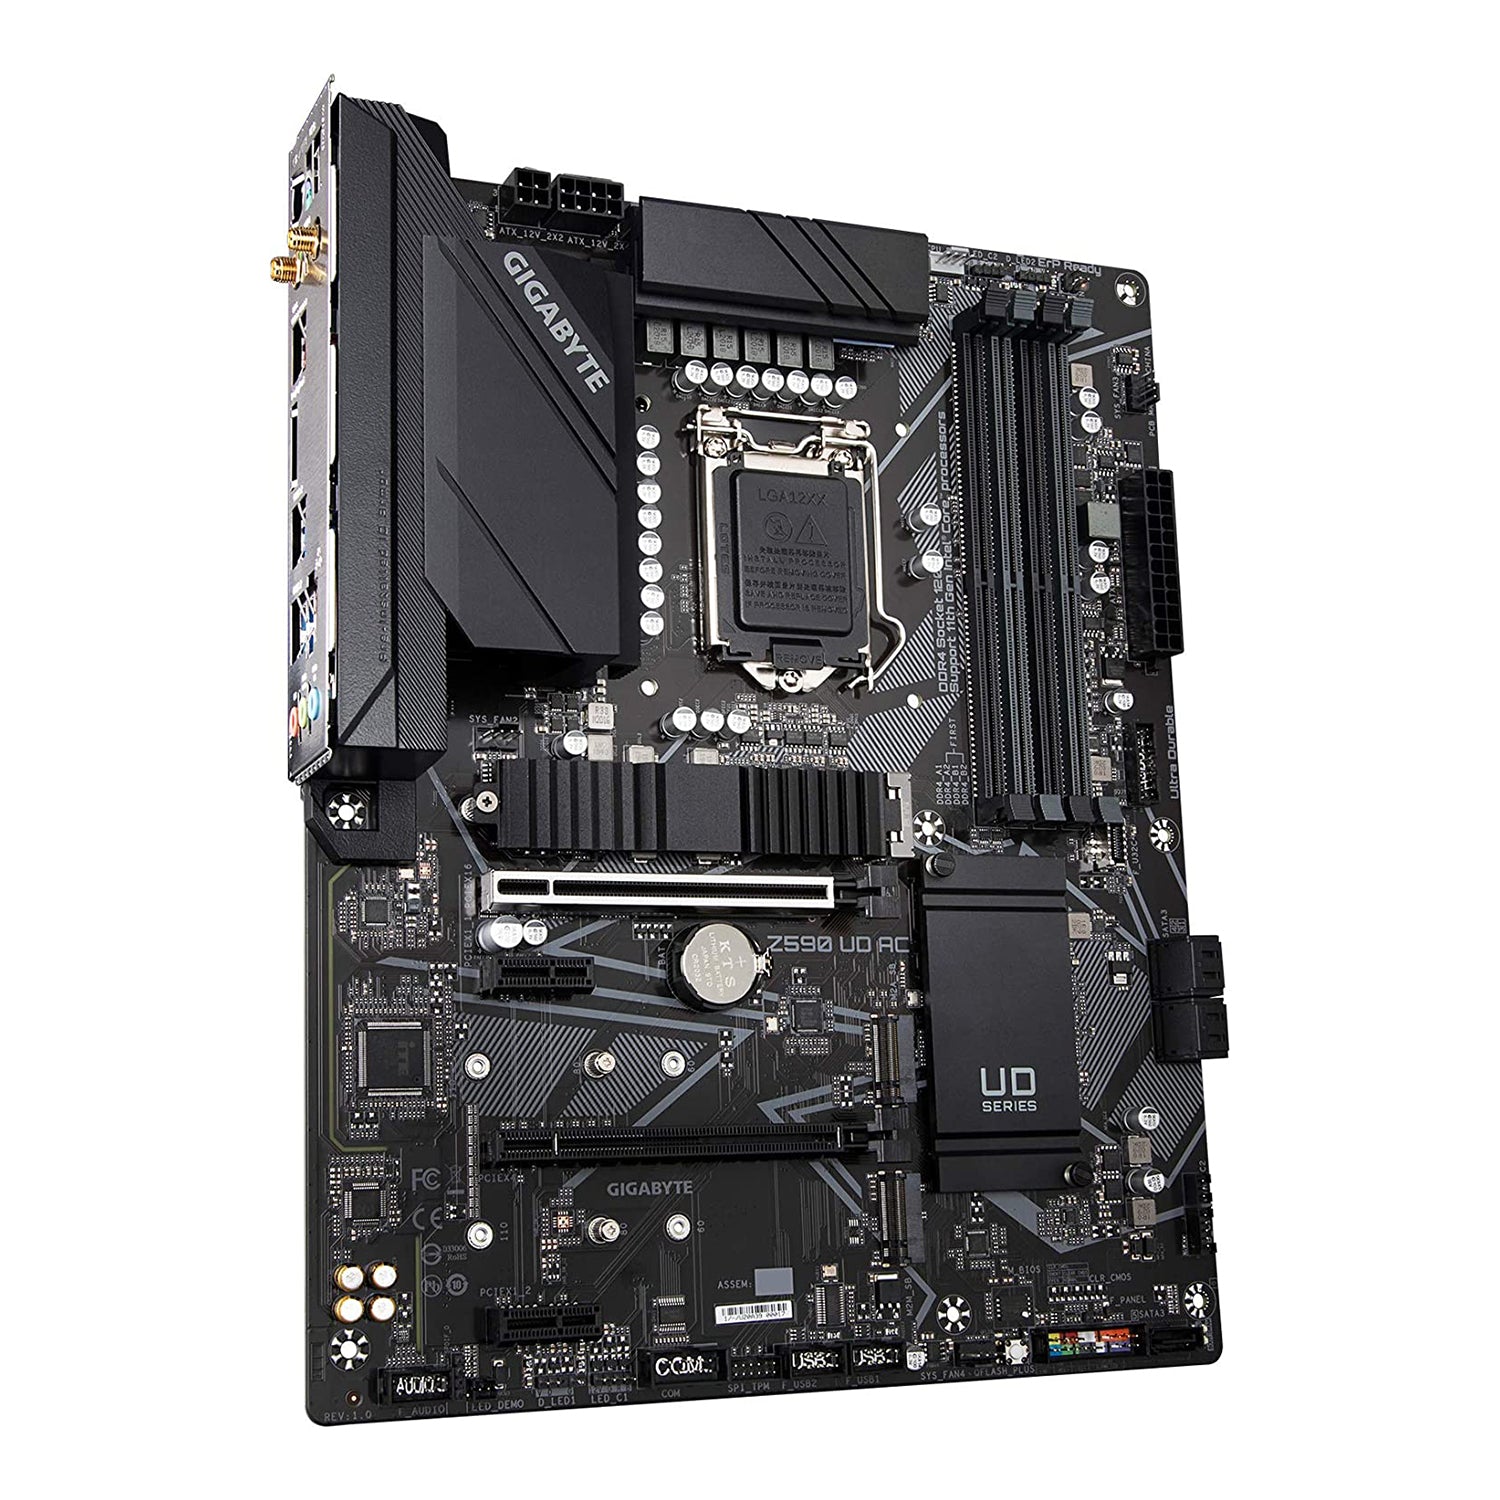 GIGABYTE Z590 Ultra Durable Motherboard ATX, 10th/ 11th Gen Intel Core, LGA 1200 Socket with Direct 12+1 Phases Digital VRM and DrMOS, Thermal Design with Integrated IO Armor, USB TYPE-C, RGB FUSION 2.0, Q-Flash Plus, DP